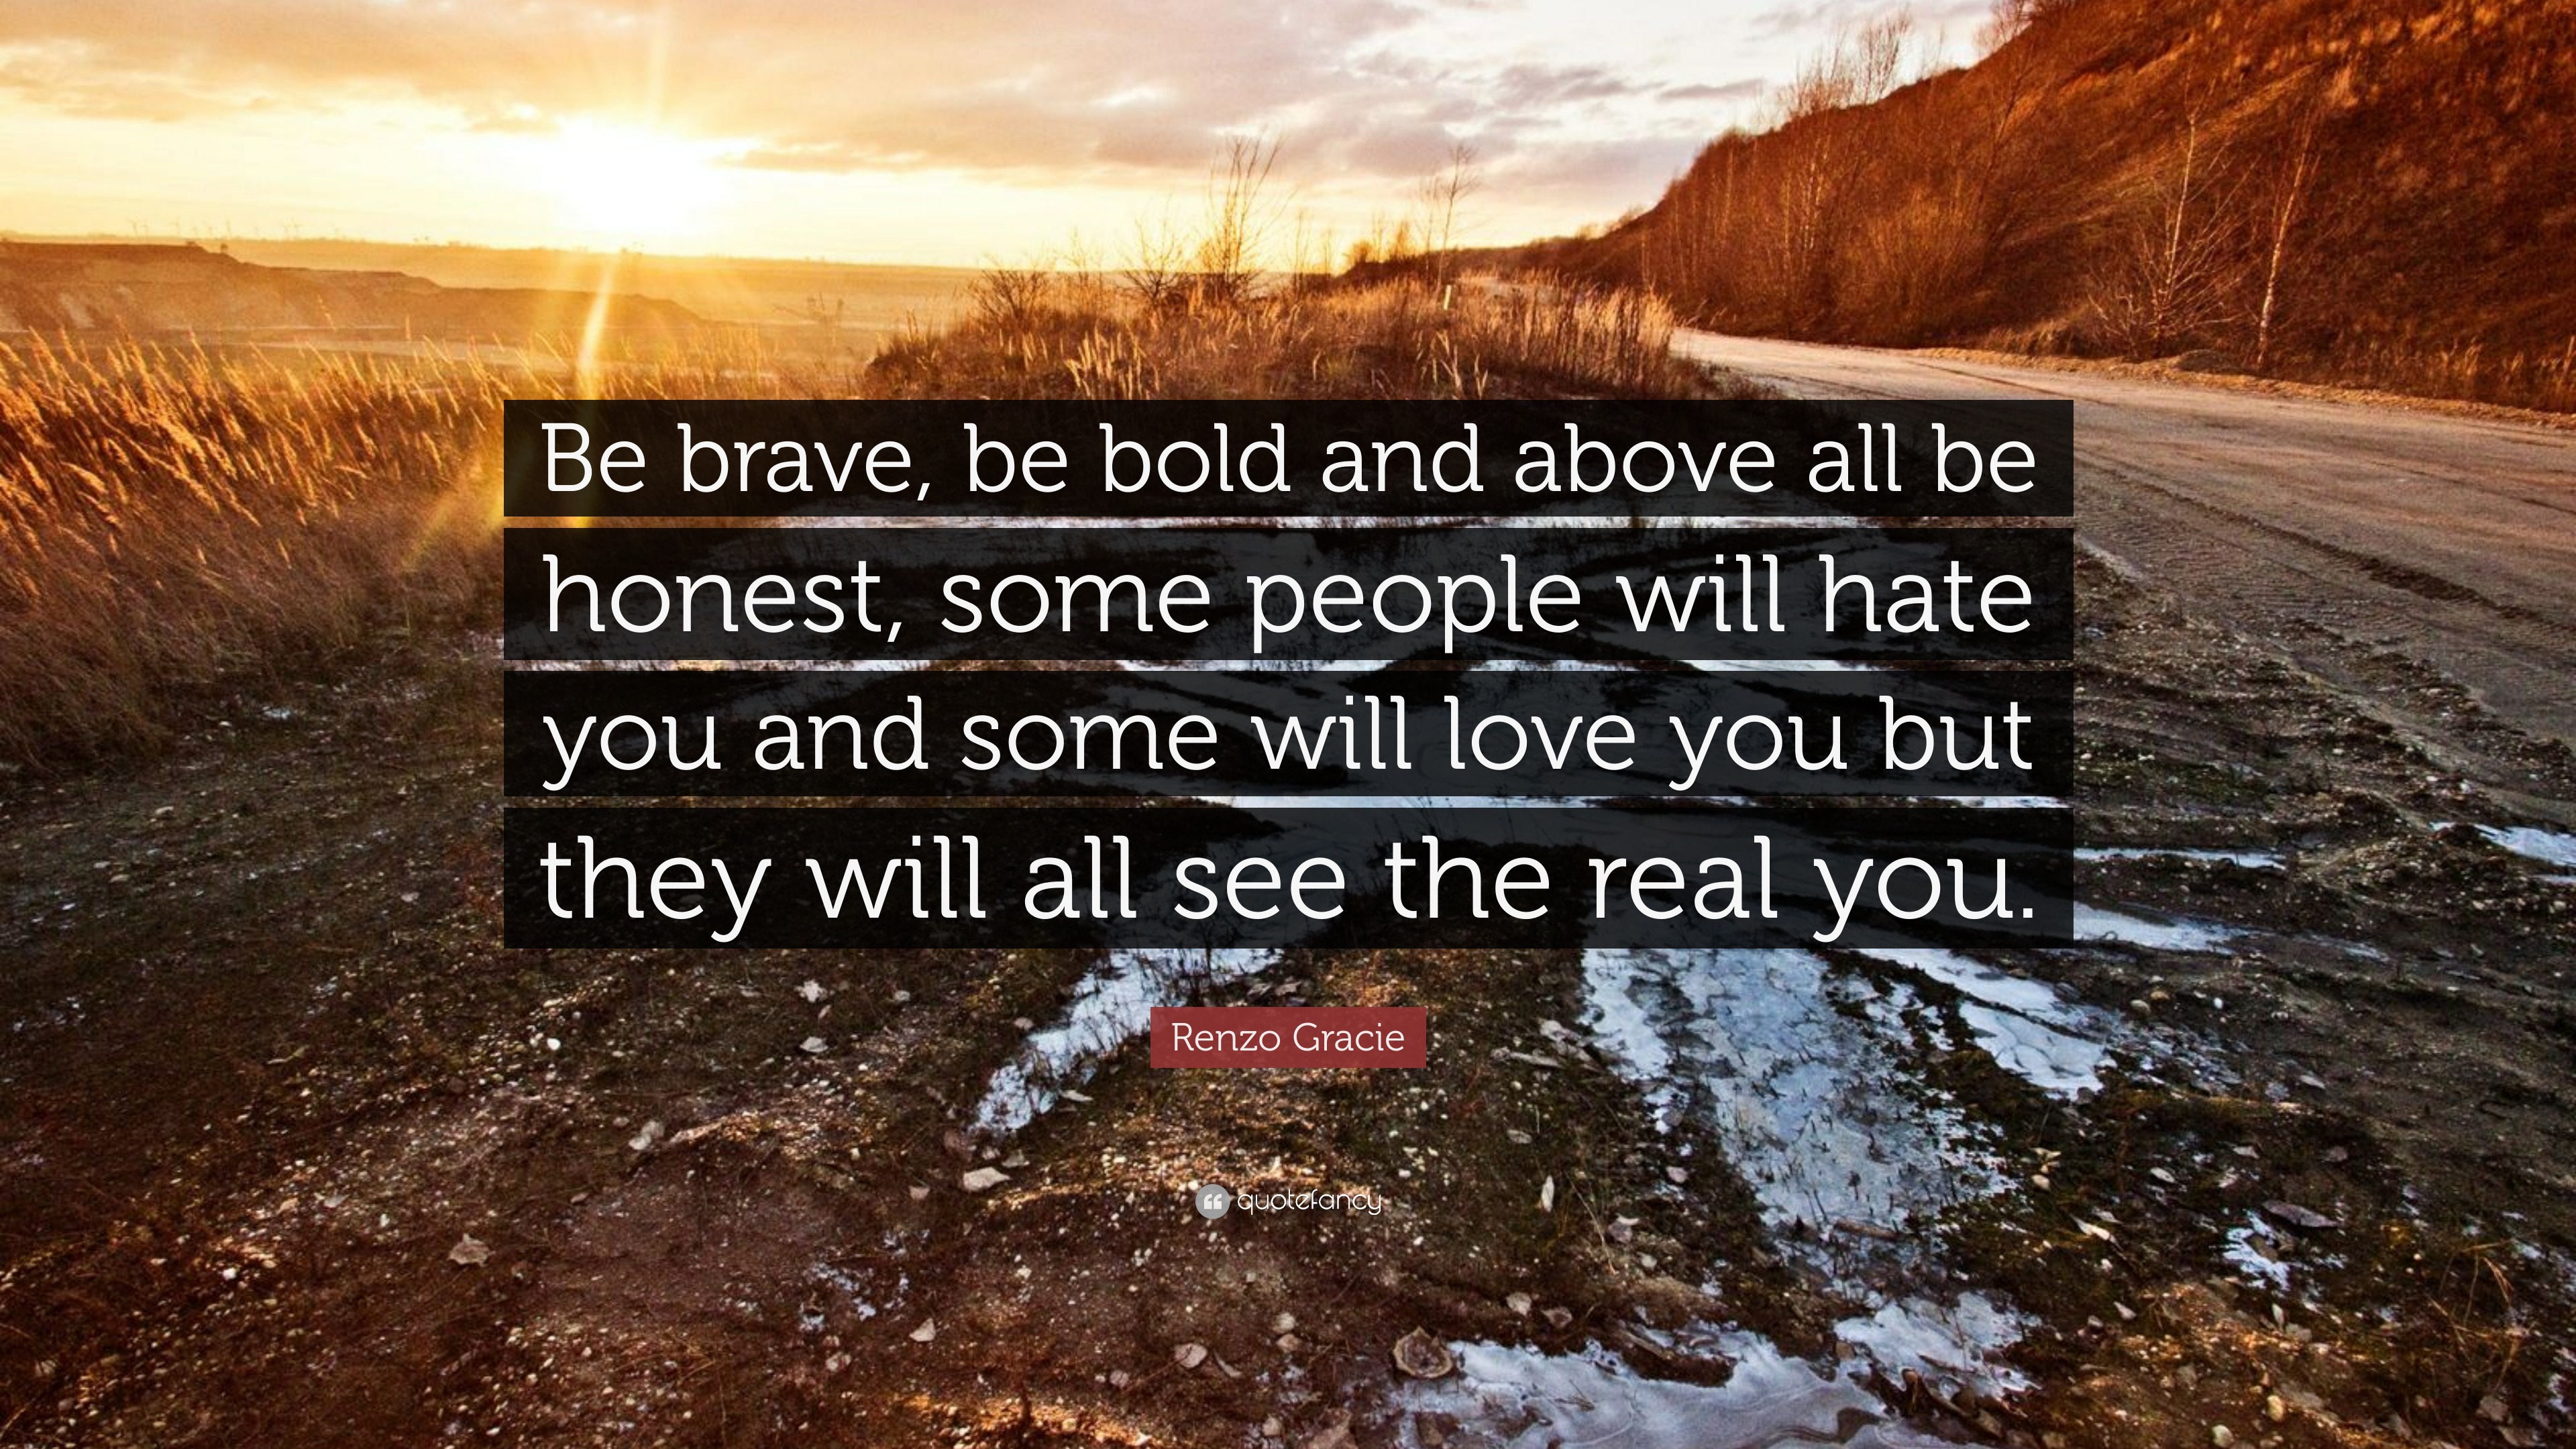 Renzo Gracie Quote “Be brave be bold and above all be honest